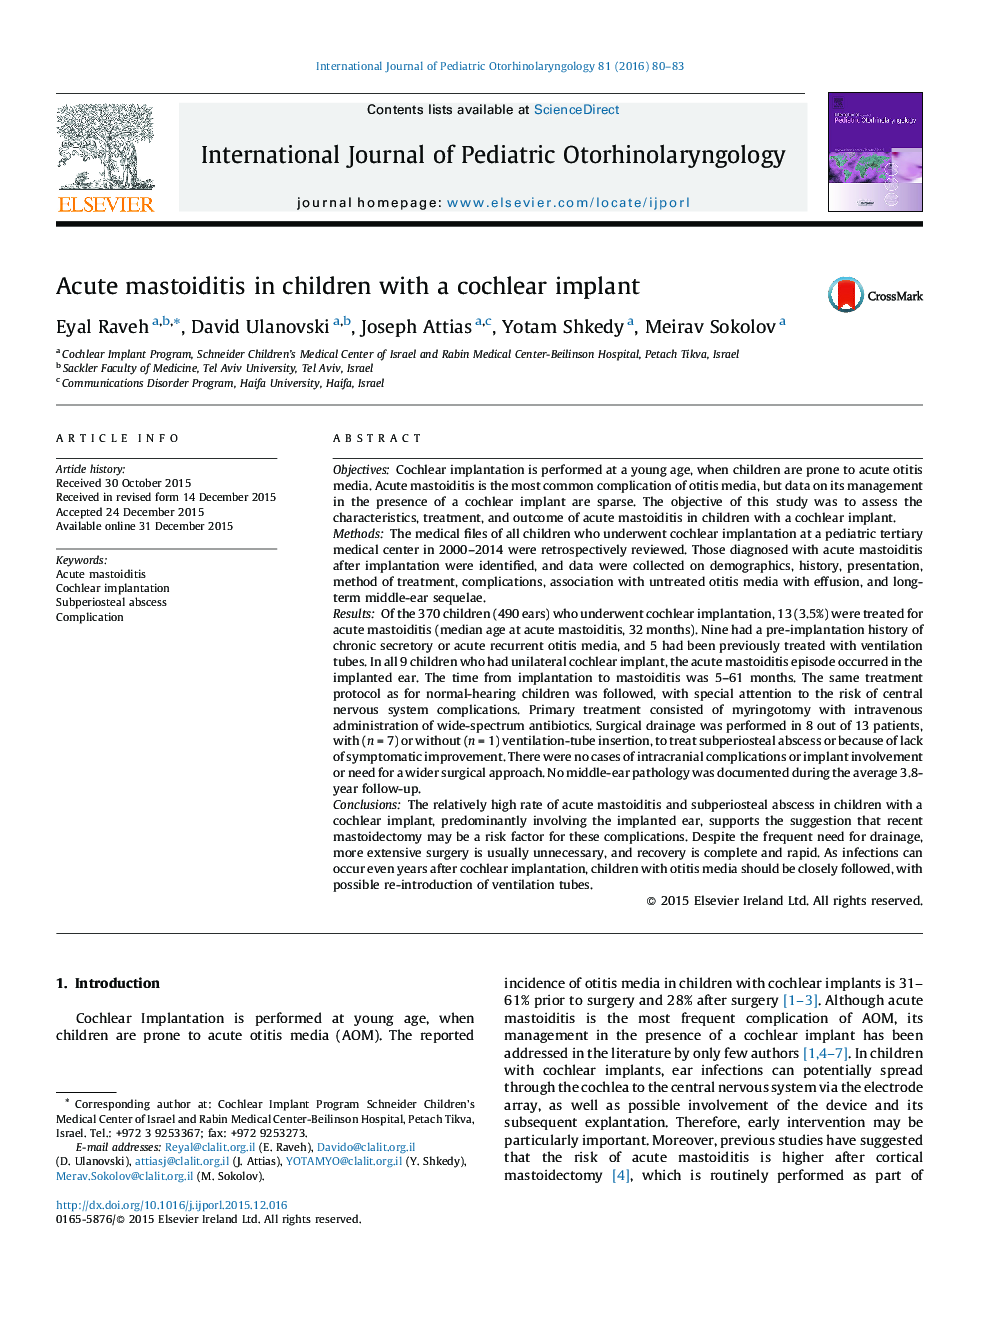 Acute mastoiditis in children with a cochlear implant